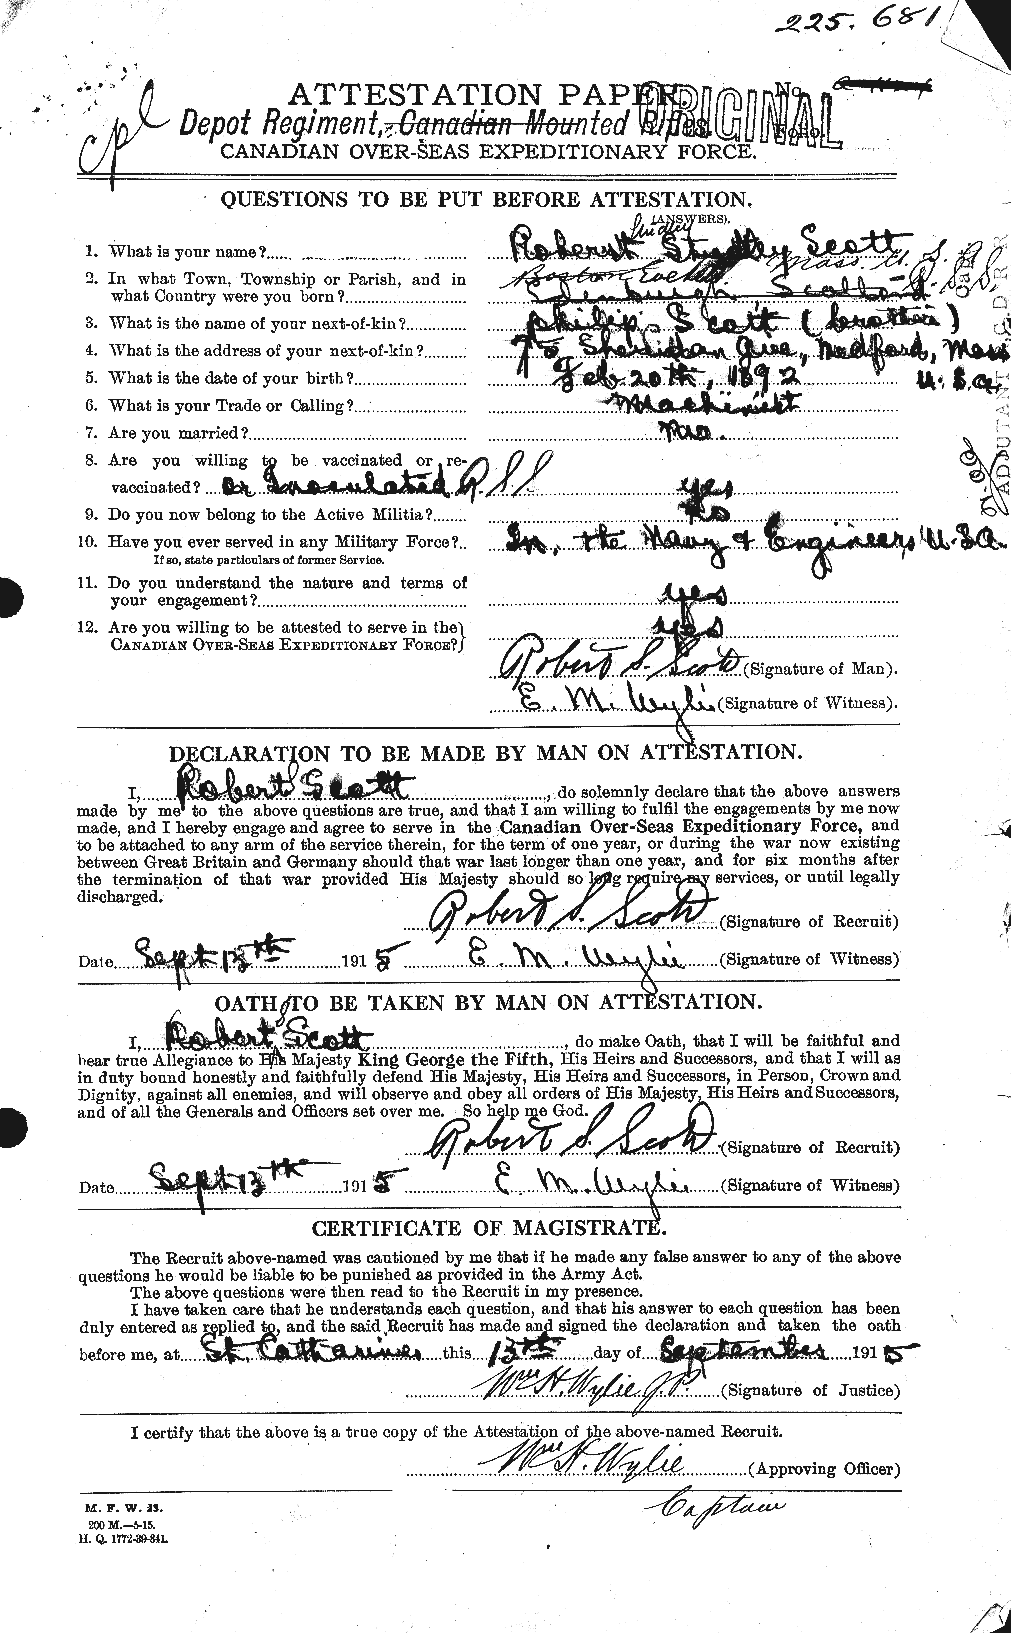 Personnel Records of the First World War - CEF 089124a